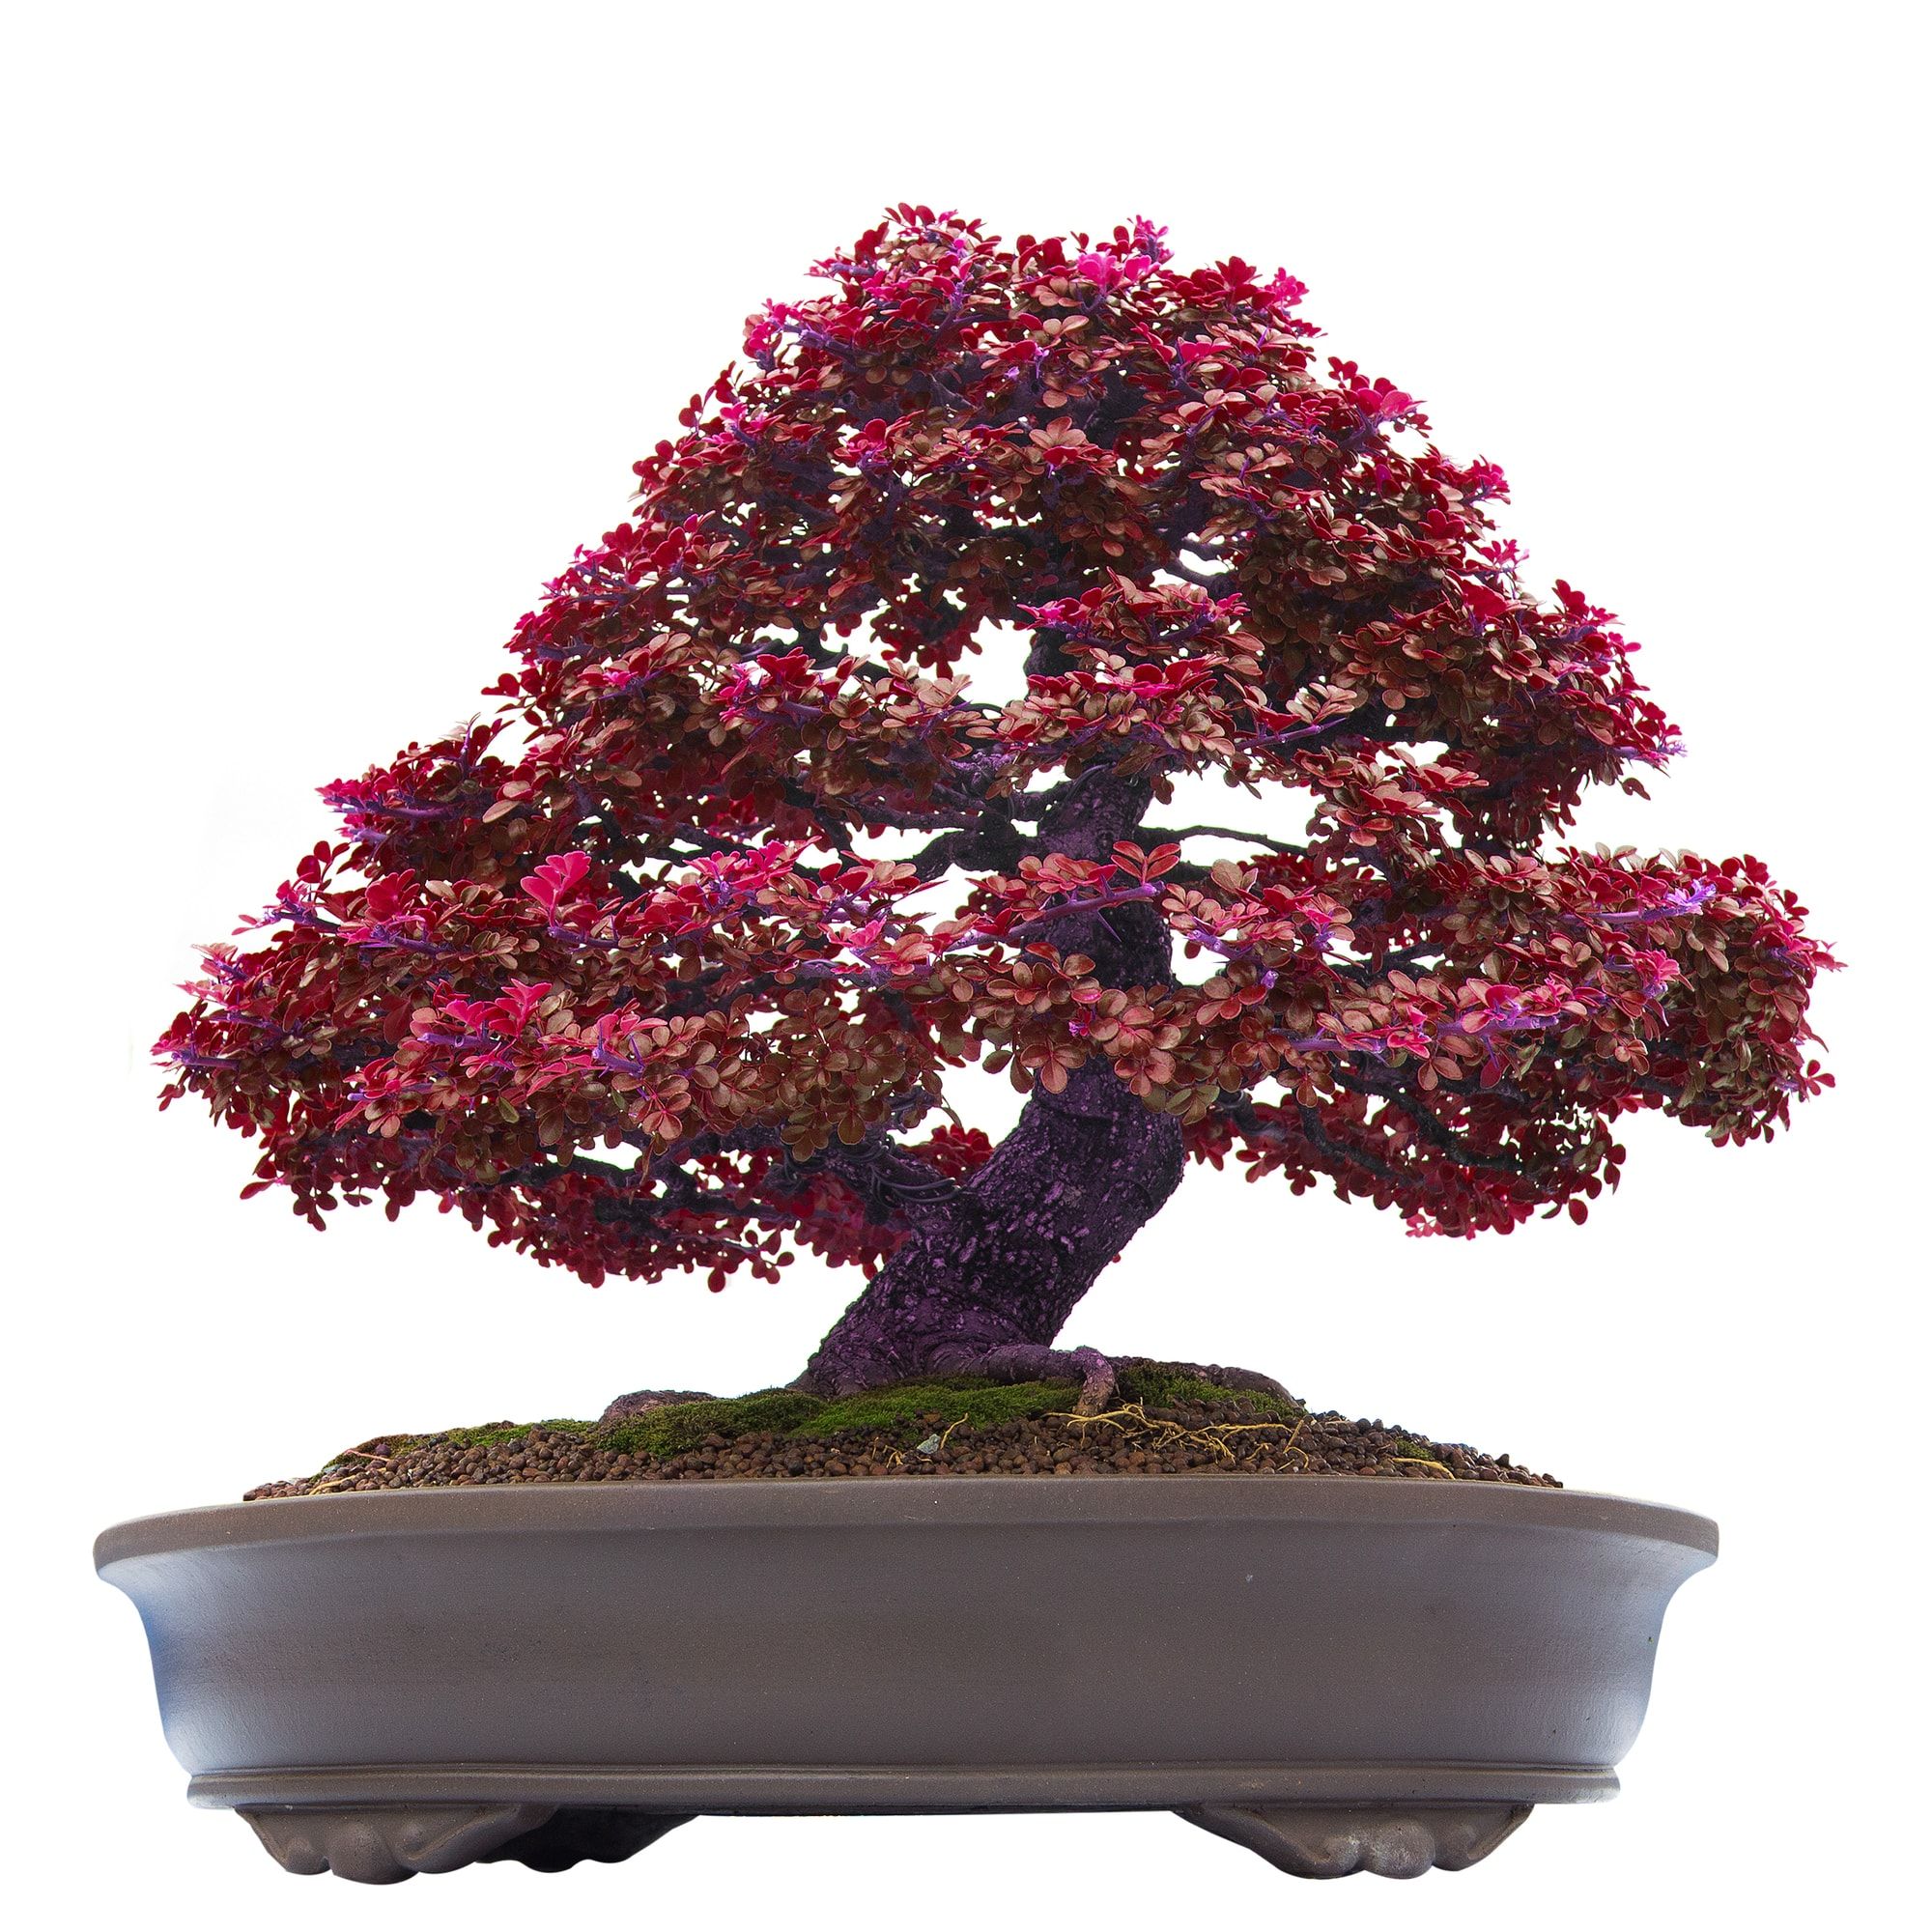 Maroon colored leaves of a bonsai tree planted in a large elliptical modern pot